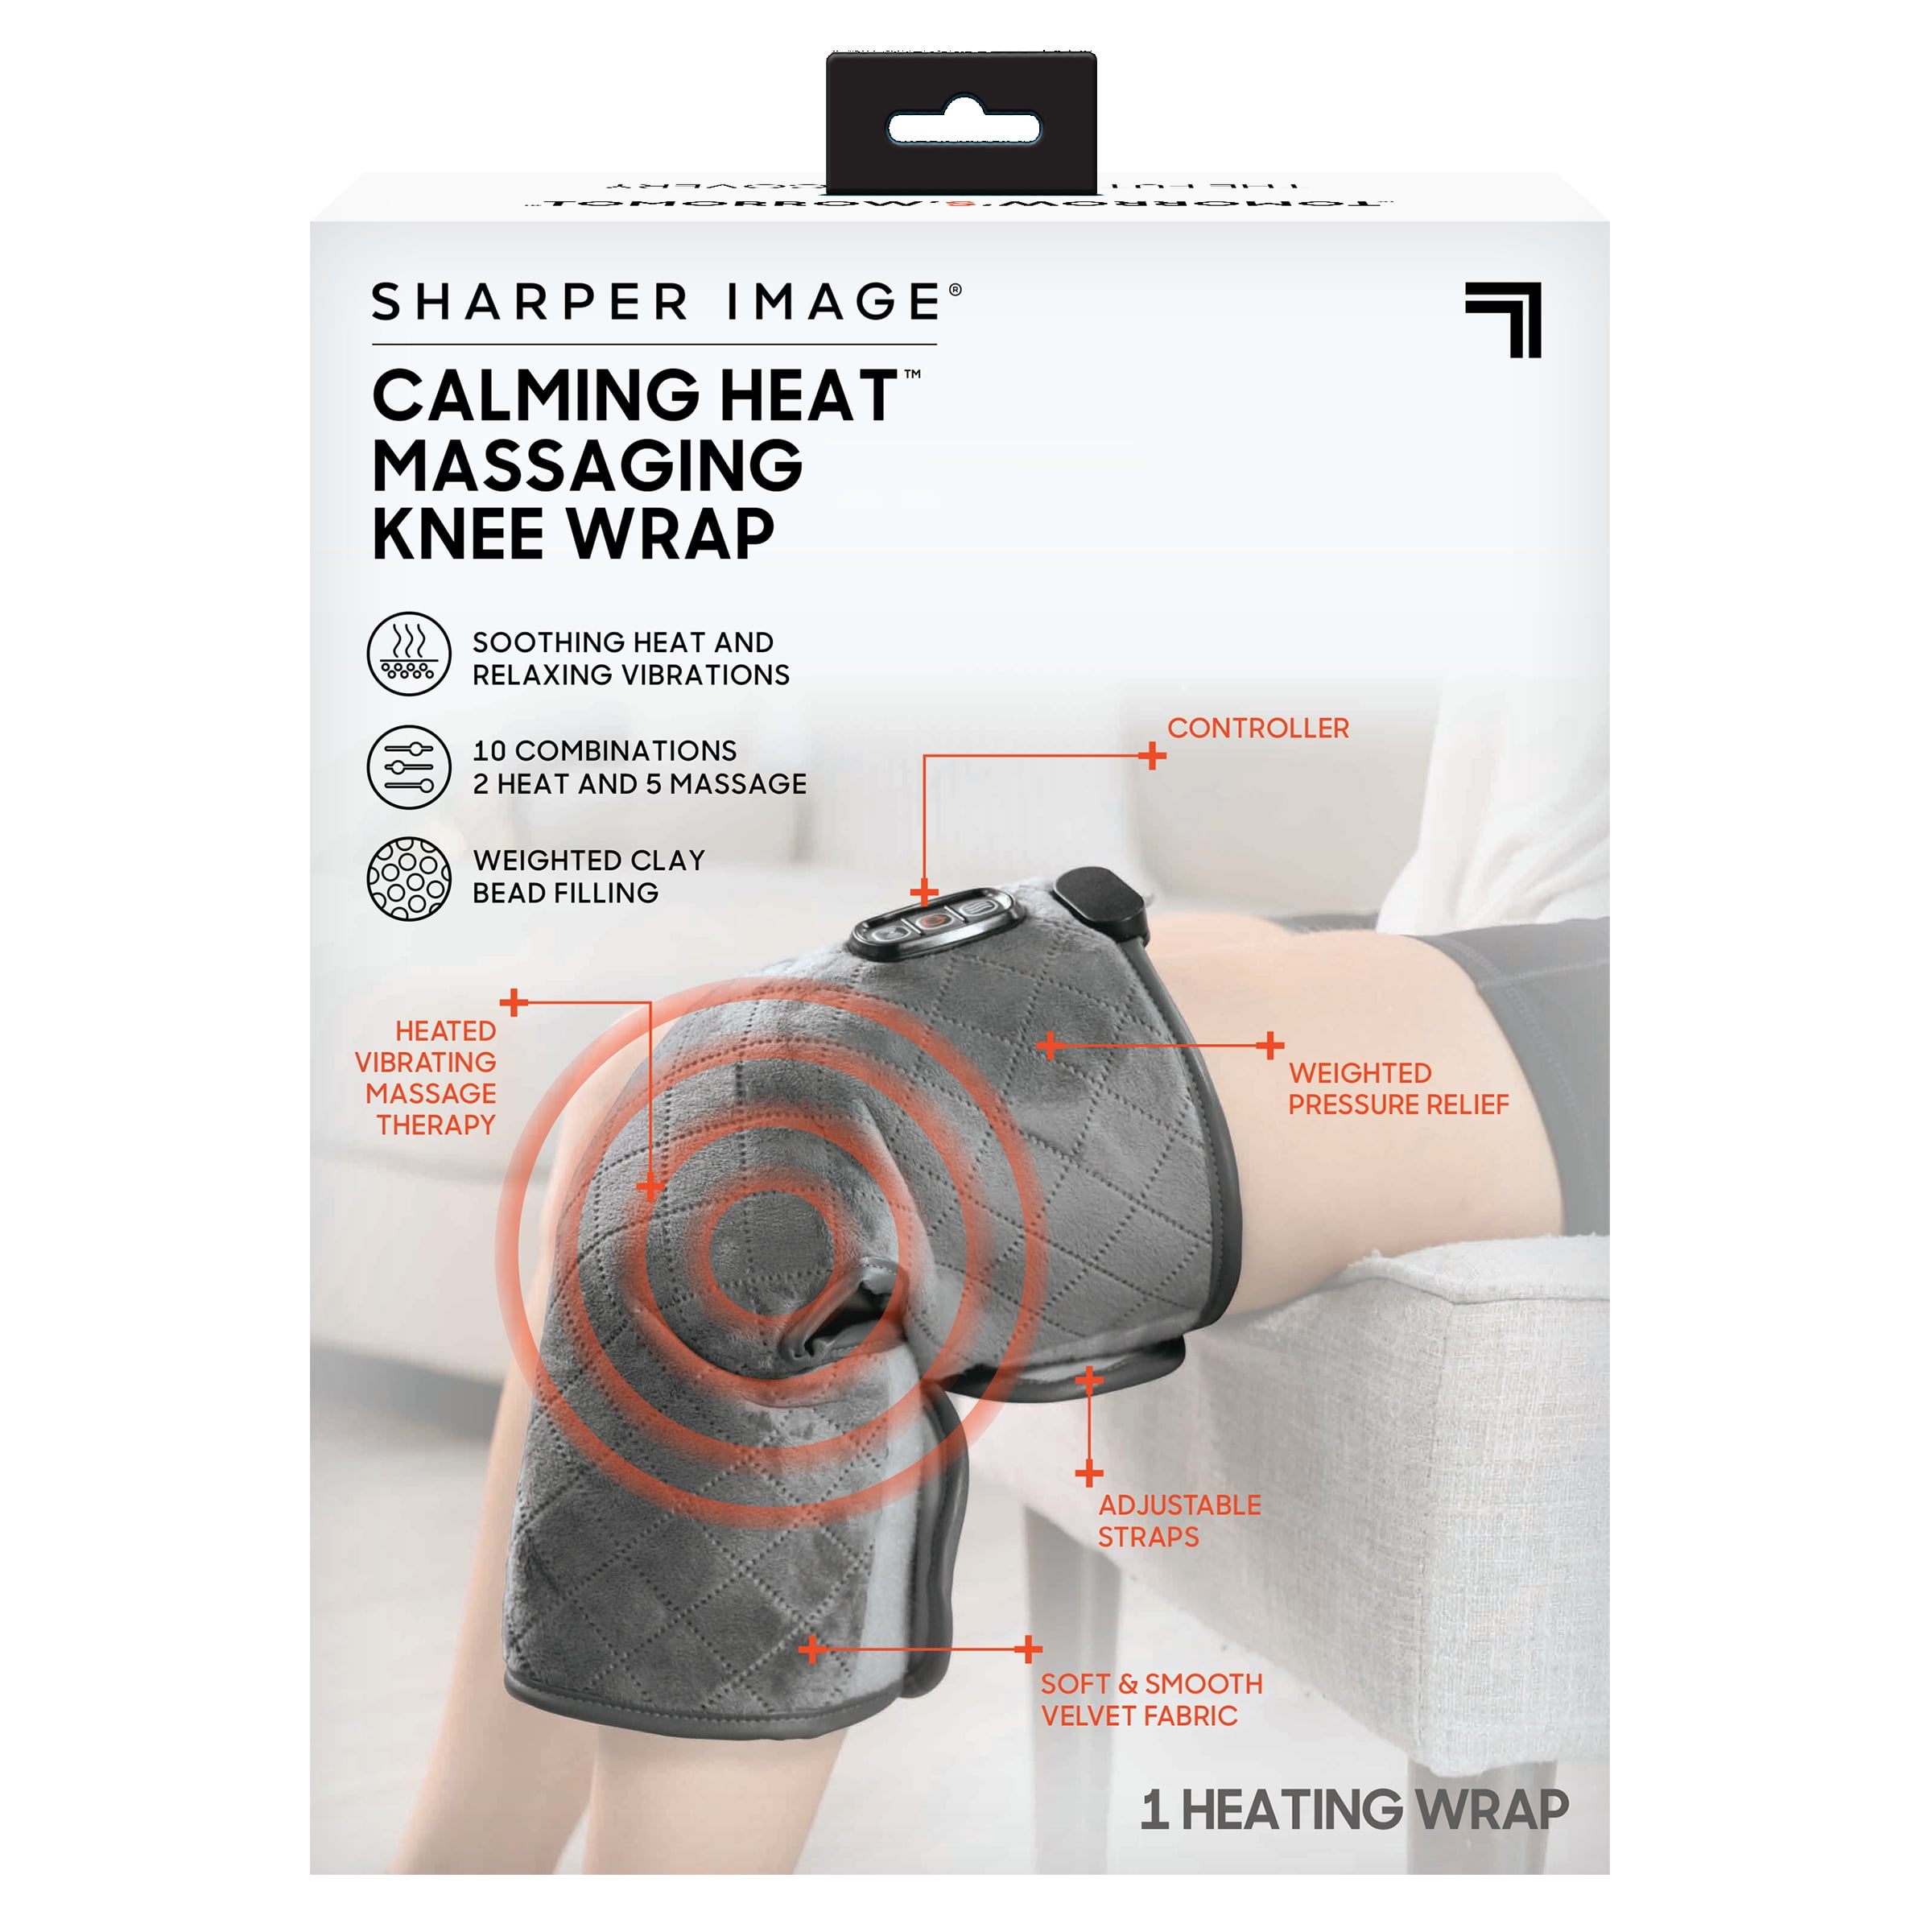 Sharper Image Calming Heat Massaging Knee Wrap, Soothing Heat & Relaxing Vibrations, Charcoal